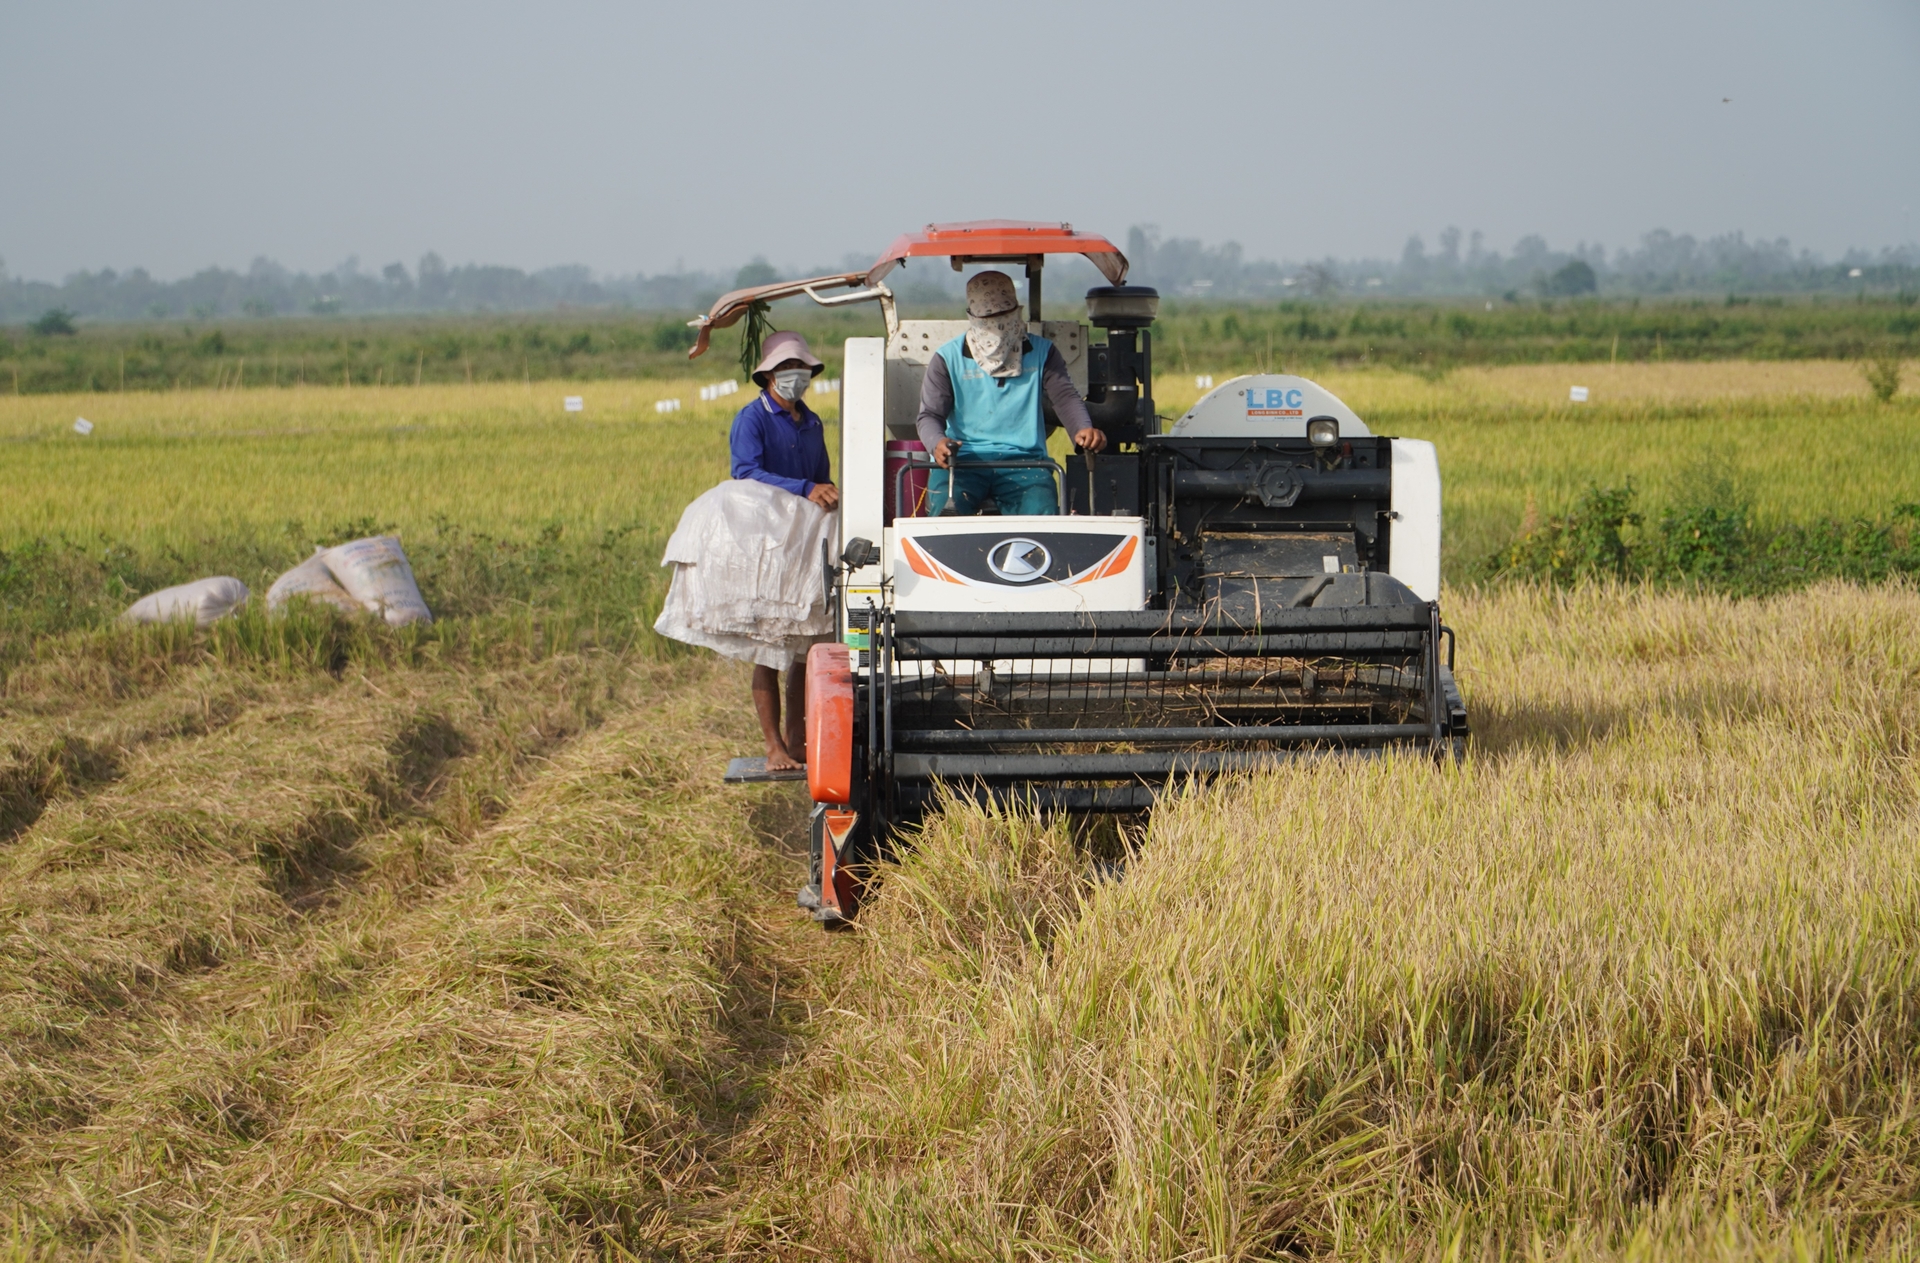 The Mekong Delta can potentially reduce 8 - 12 million tons of CO2e per year by applying low-emissions technical methods in rice cultivation. Photo: Kim Anh.